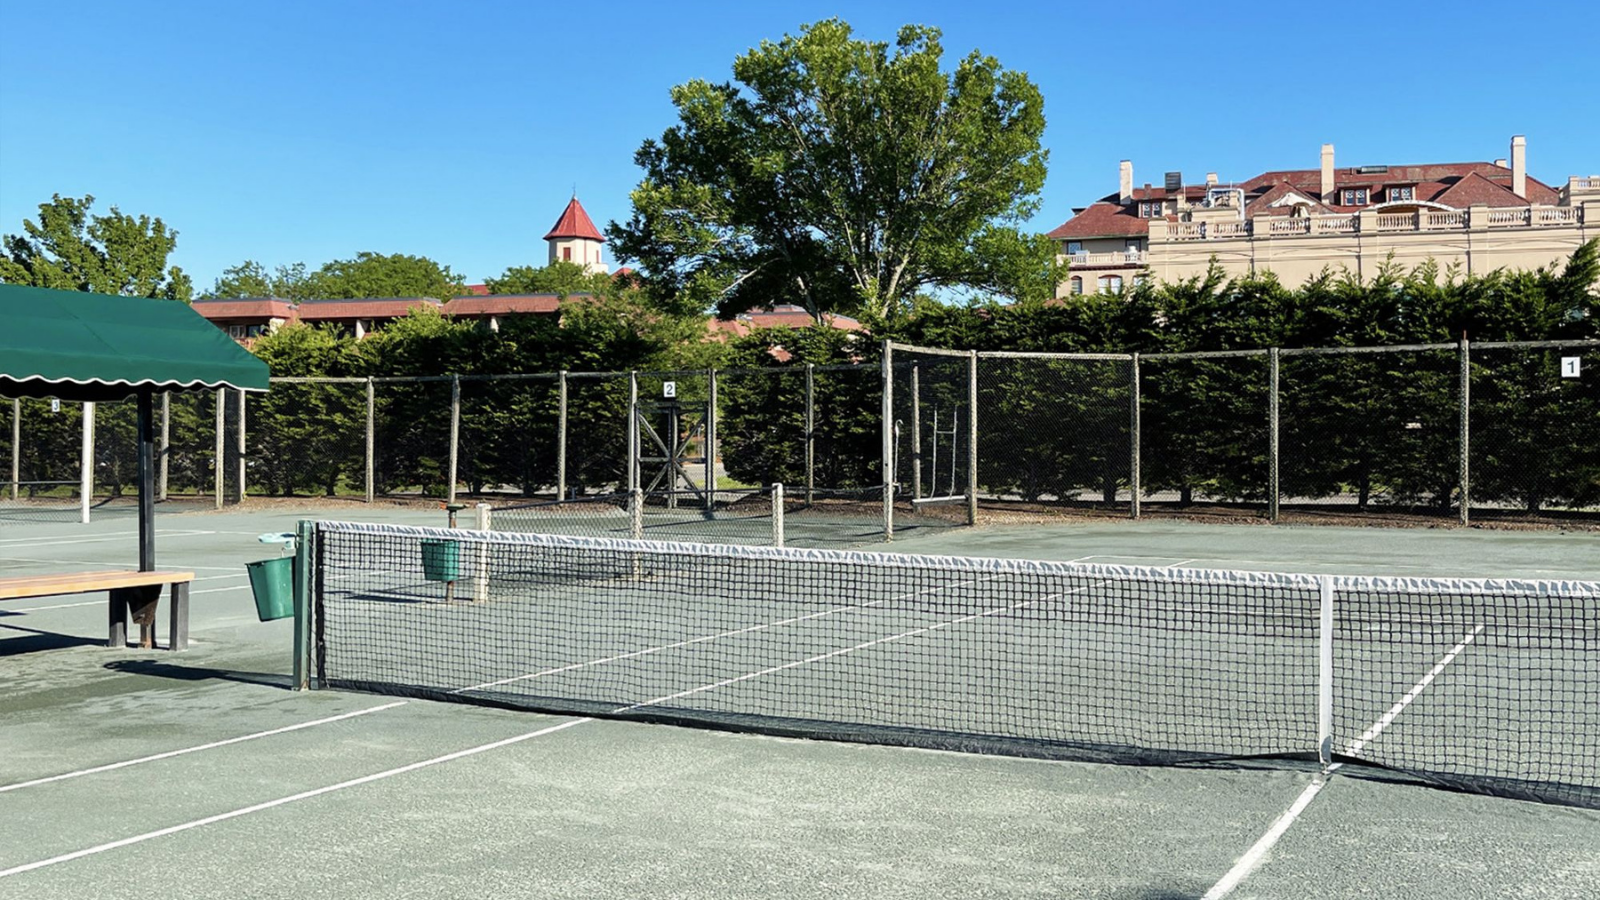 Experience tennis, golf, and pickleball lessons at the Mansion at Ocean Edge.